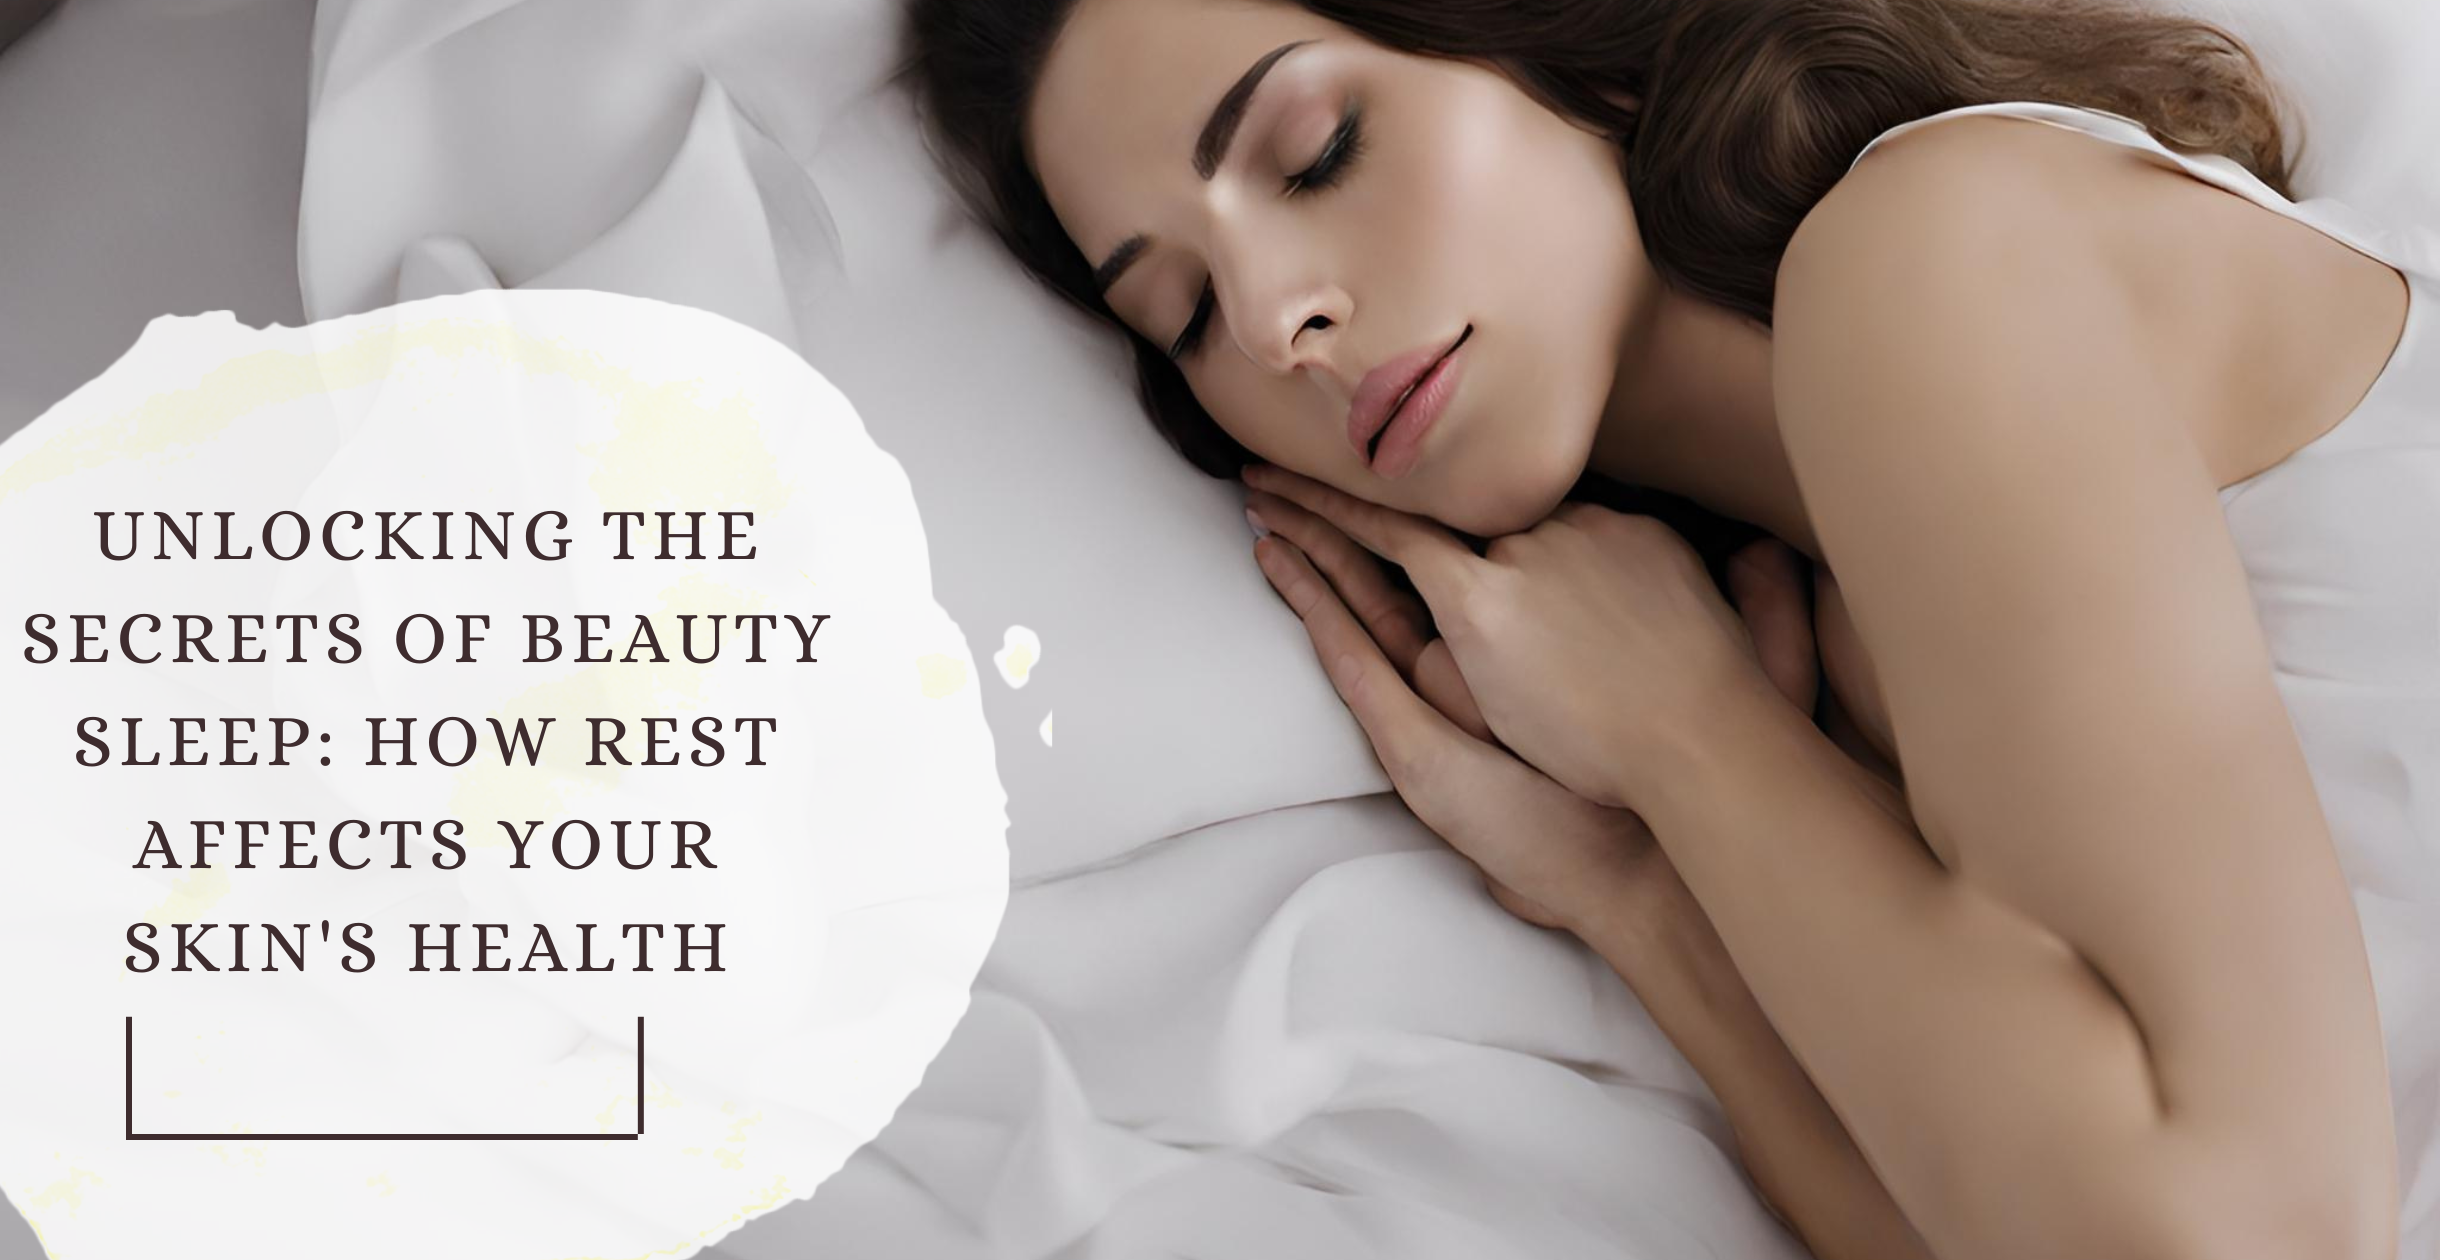 Unlocking the Secrets of Beauty Sleep: How Rest Affects Your Skin's Health